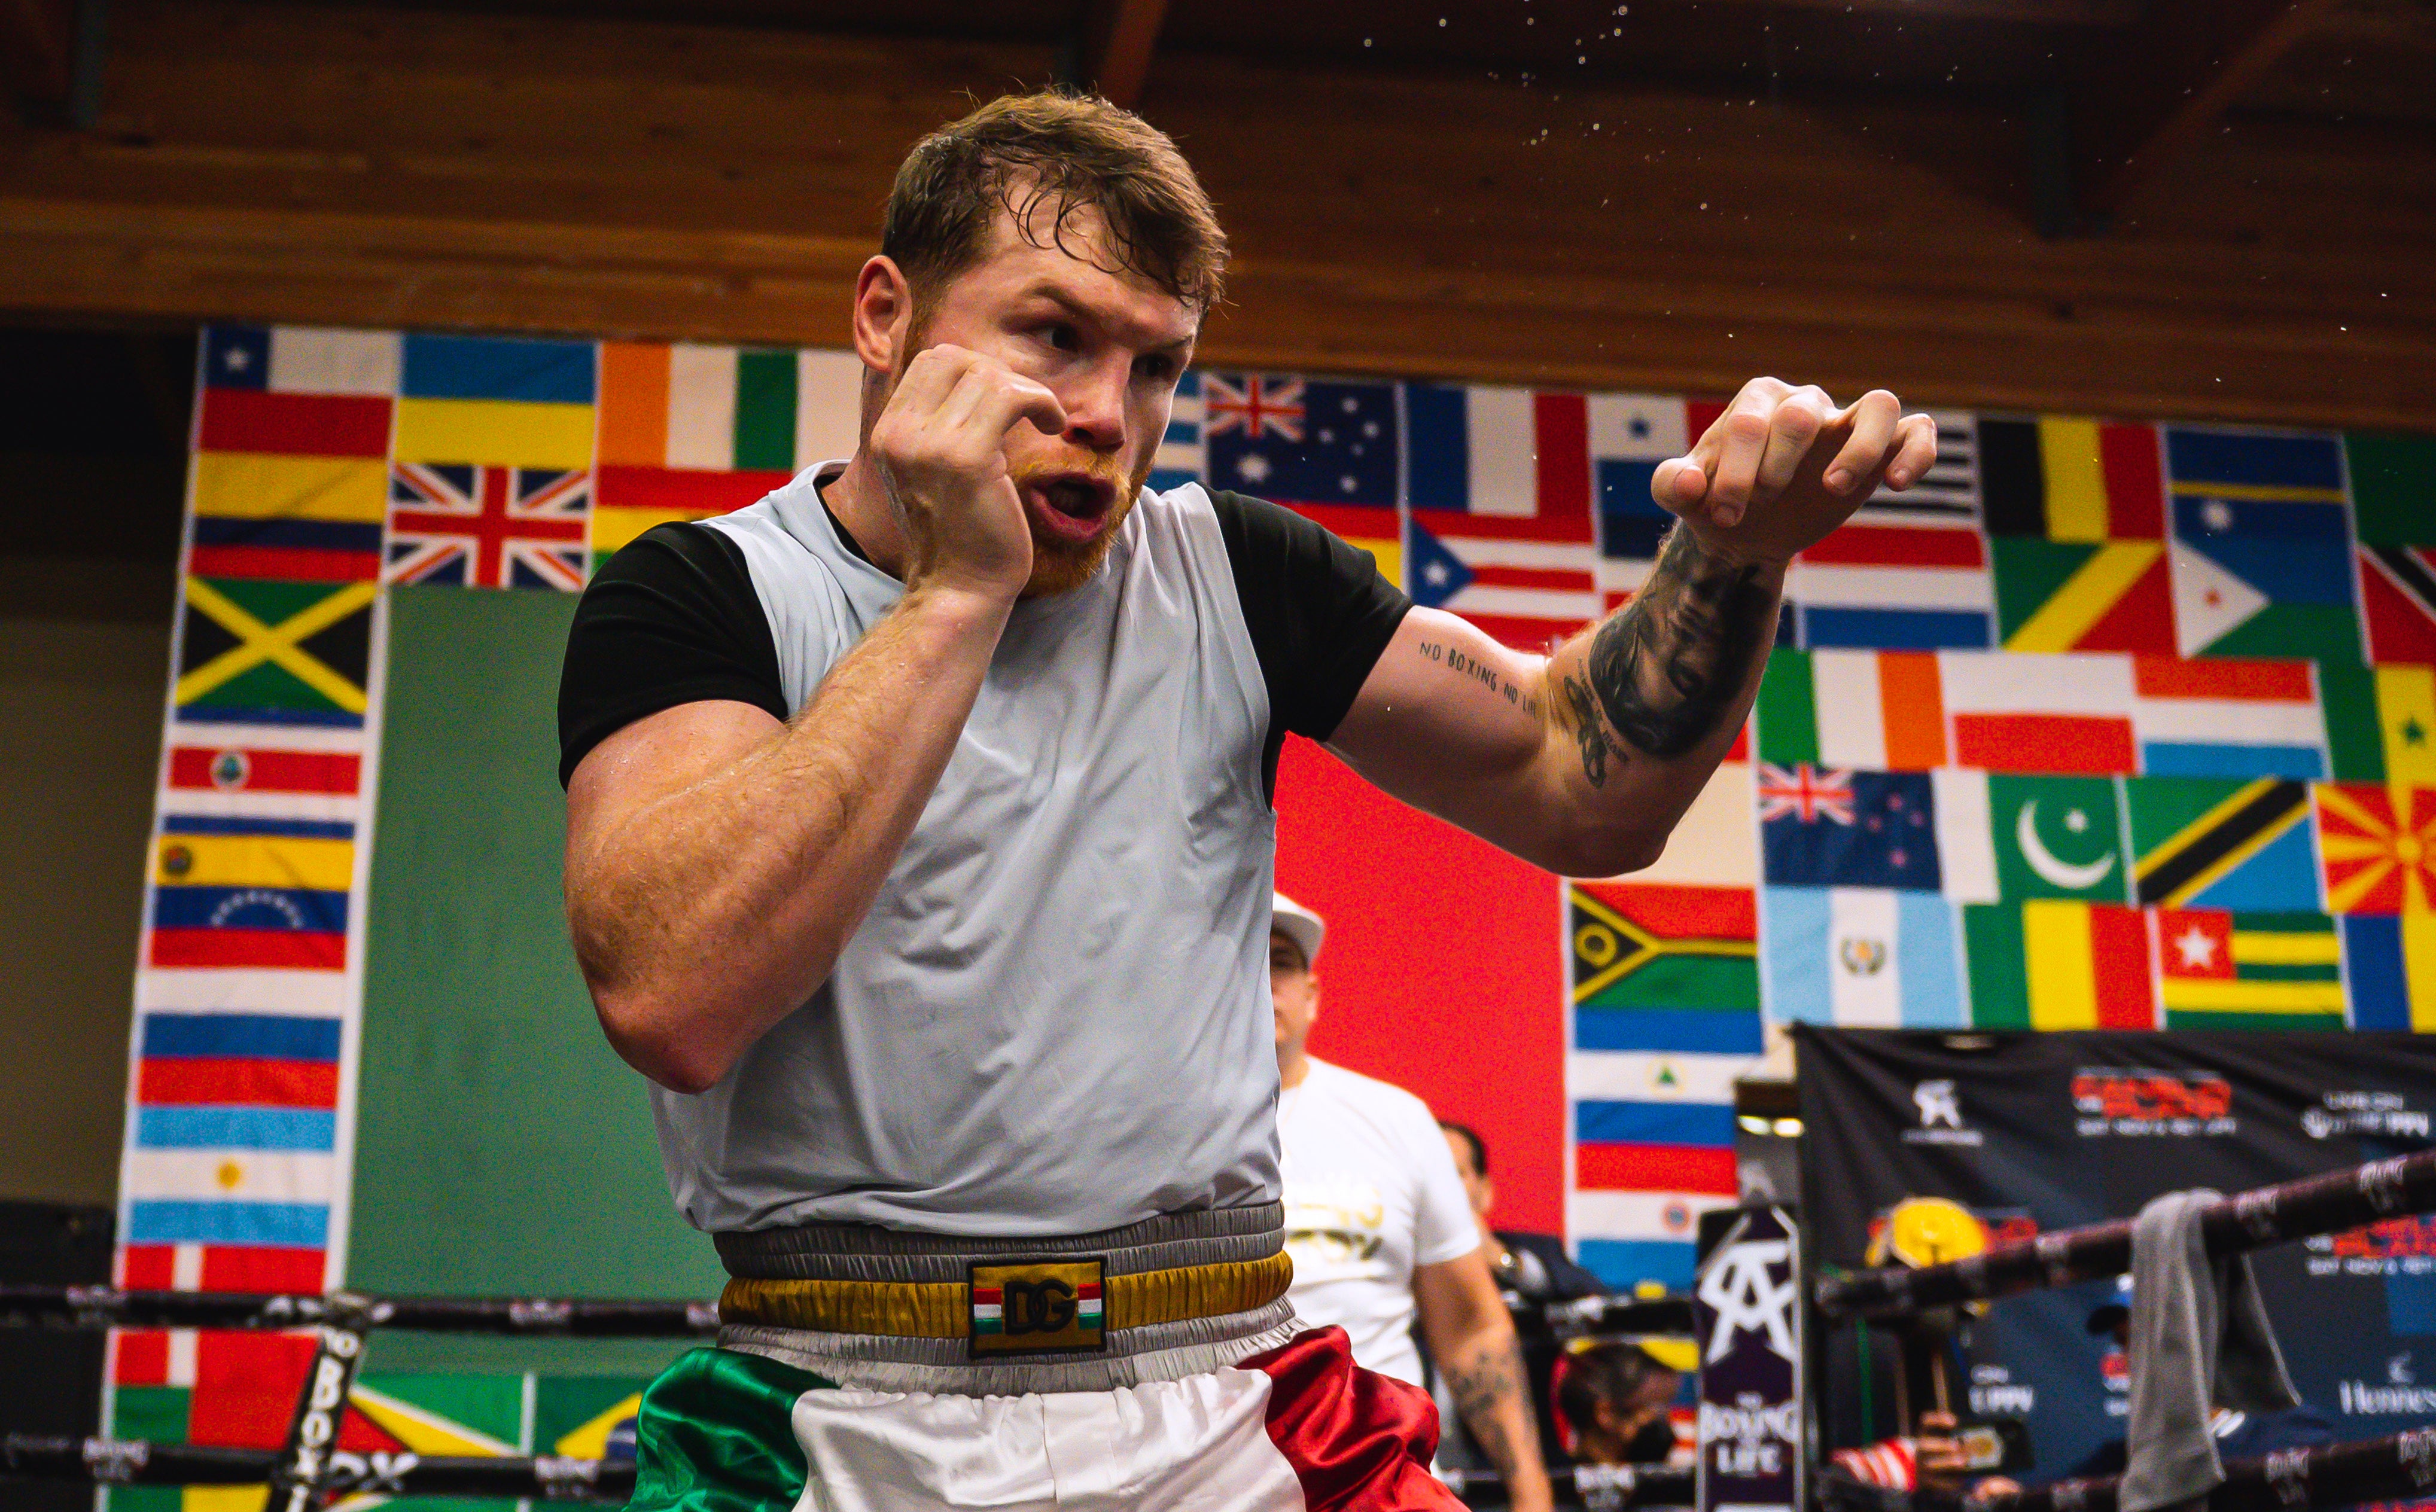 Alvarez defends a variety of super-middleweight belts in Las Vegas.